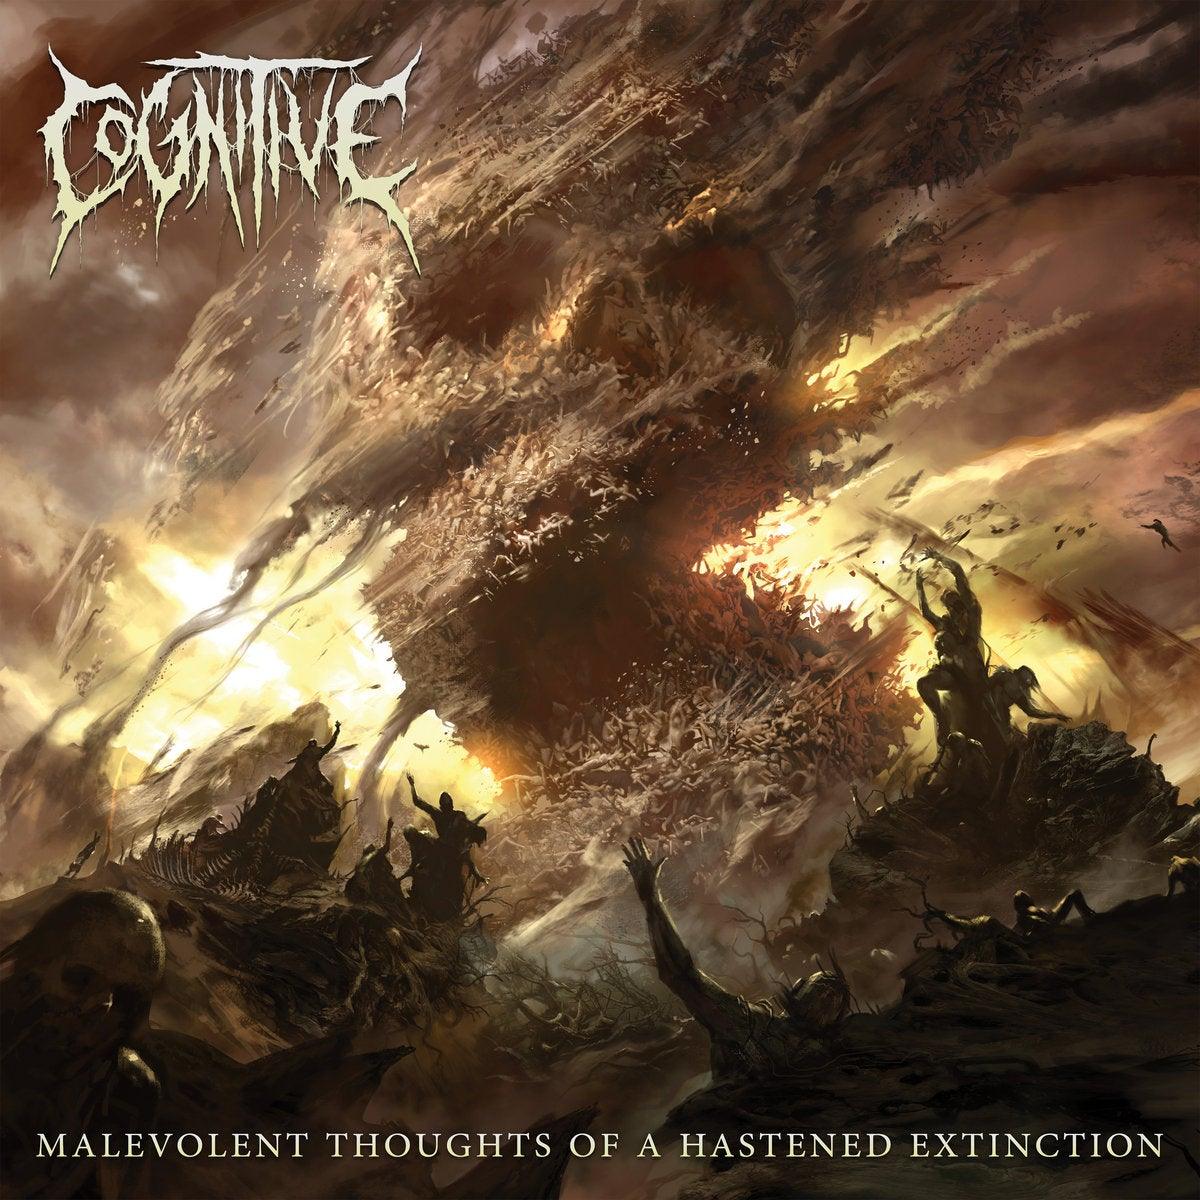 Buy – Cognitive ‎"Malevolent Thoughts Of A Hastened Extinction" 12" – Band & Music Merch – Cold Cuts Merch